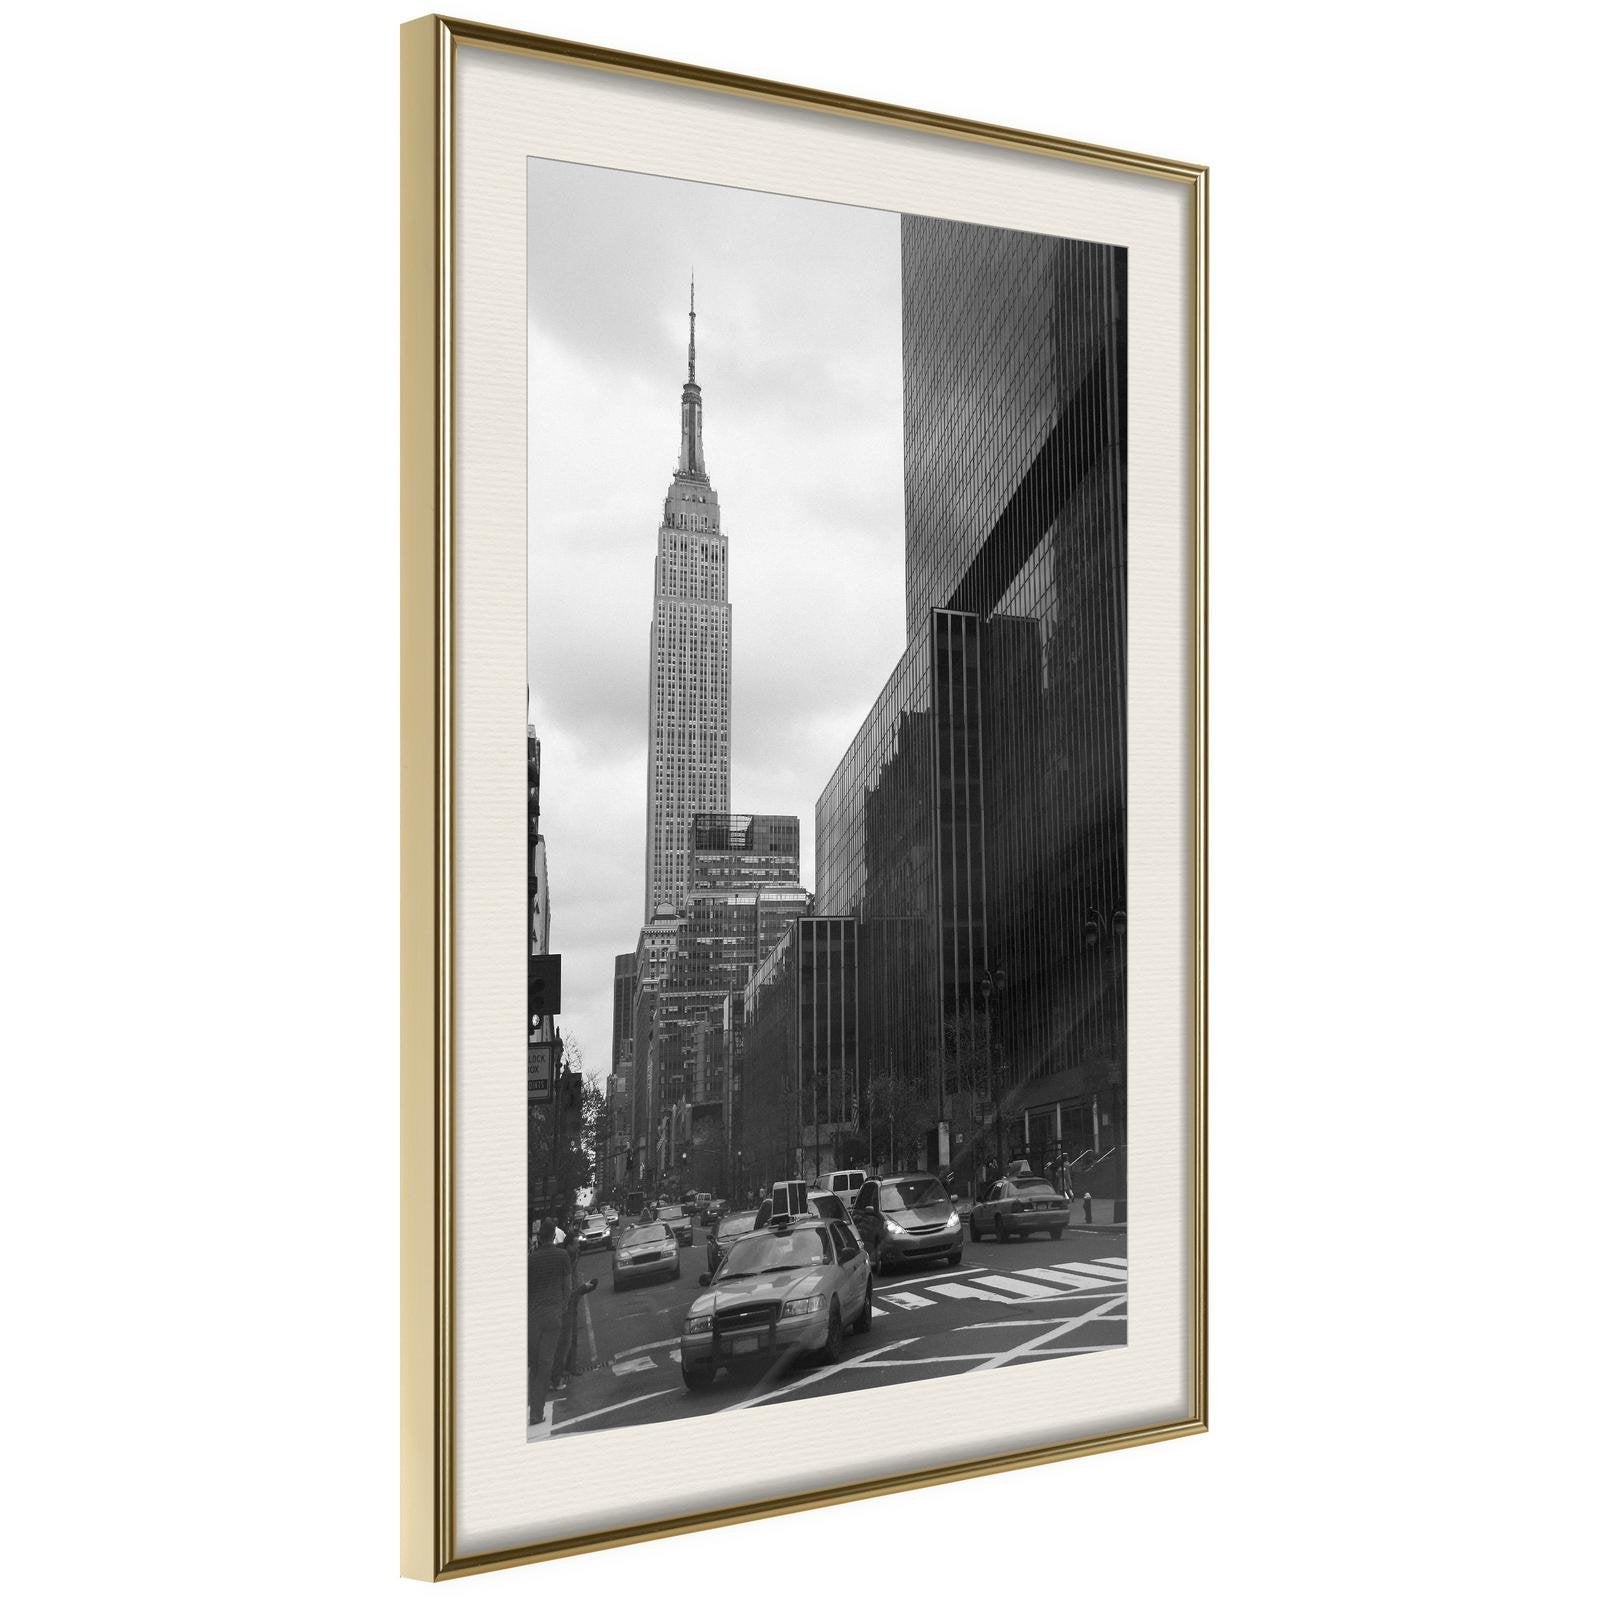 Inramad Poster / Tavla - Empire State Building-Poster Inramad-Artgeist-20x30-Guldram med passepartout-peaceofhome.se